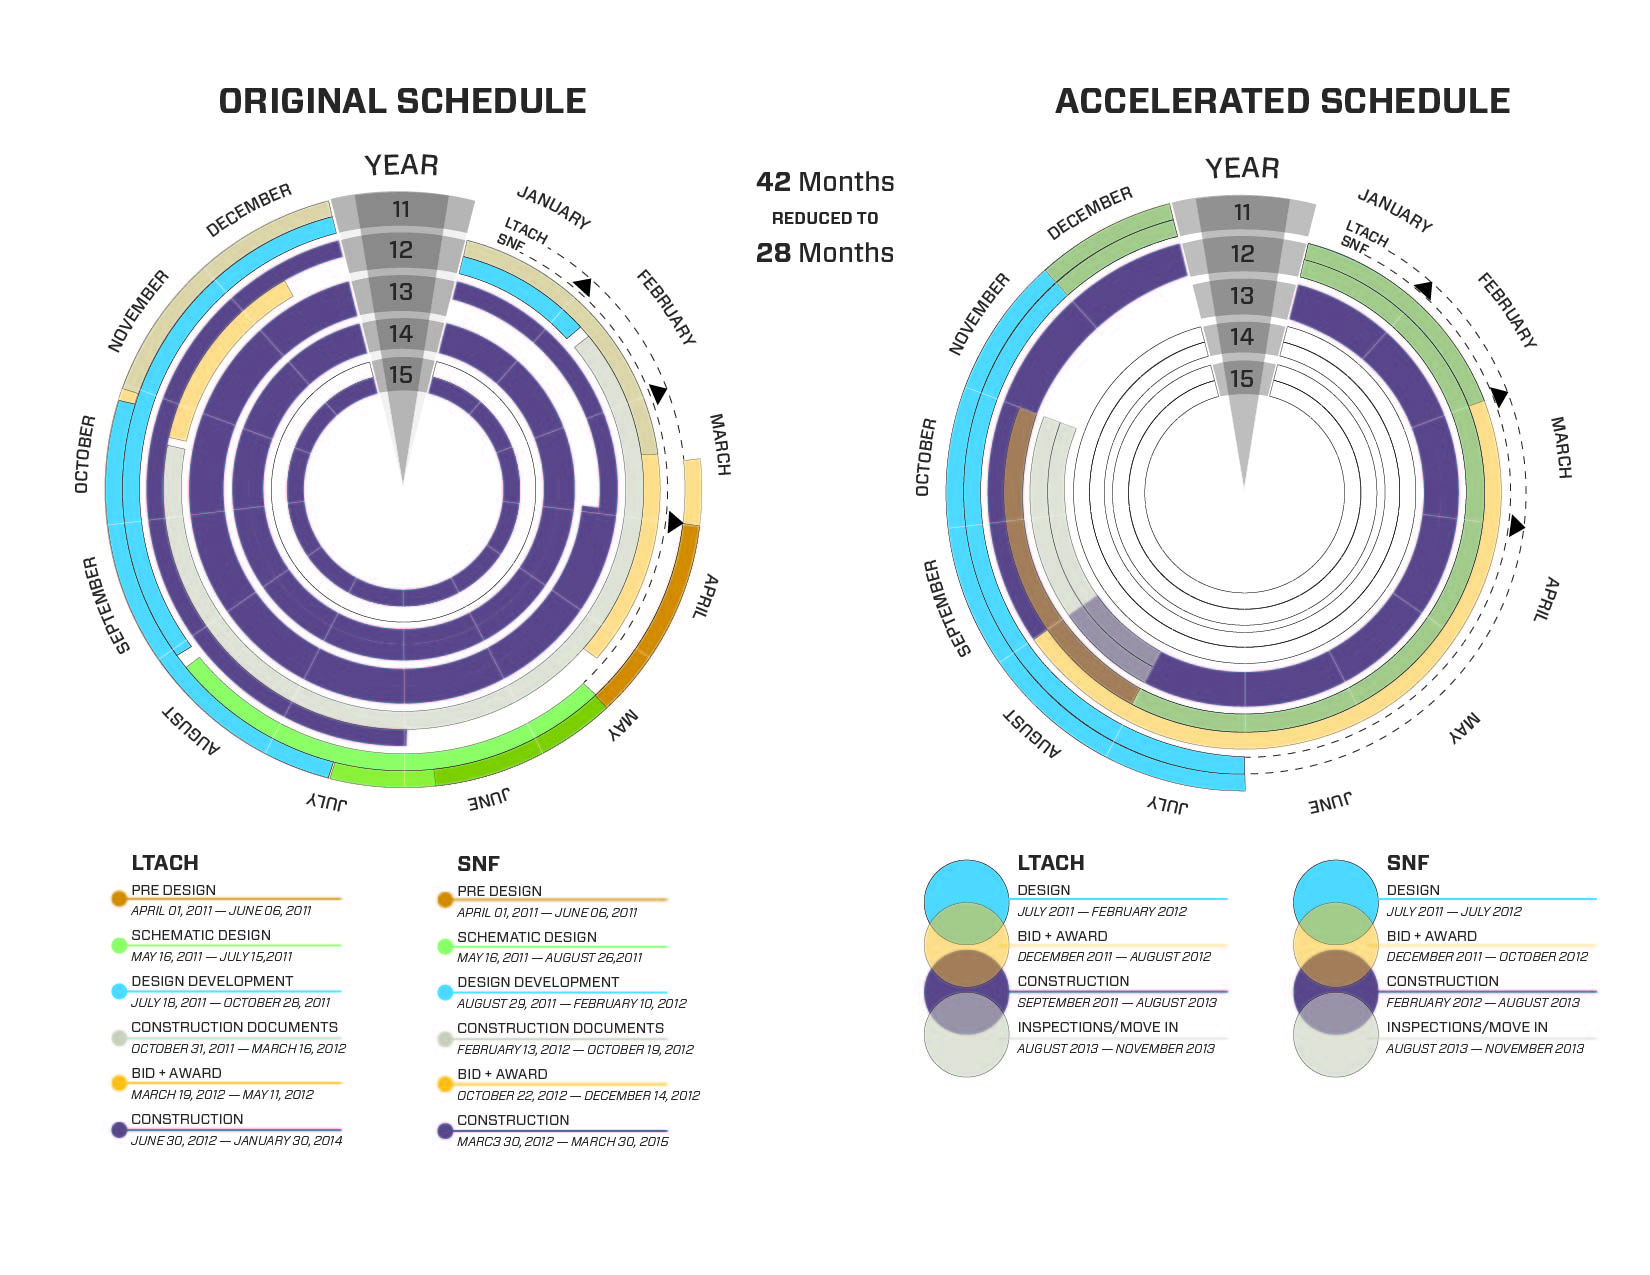 Henry J. Carter Accelerated Schedule Infographic